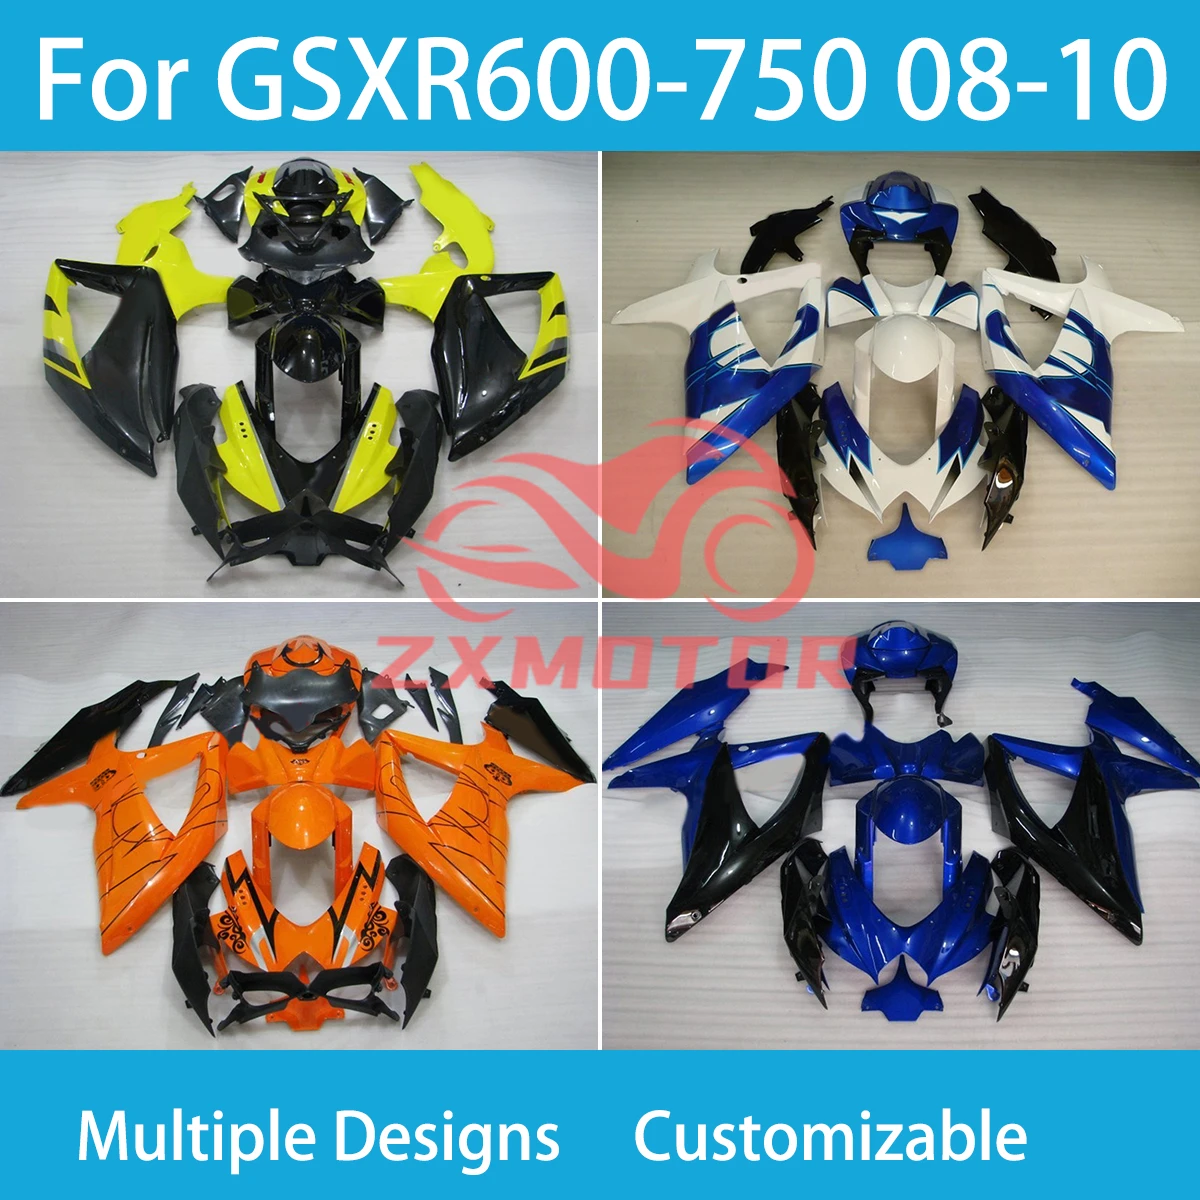 

GSXR600 GSXR750 08 10 New Style Fairings for SUZUKI K8 GSXR 600 750 2008 2010 ABS Painted Fairing Kit Injection Molding Fit